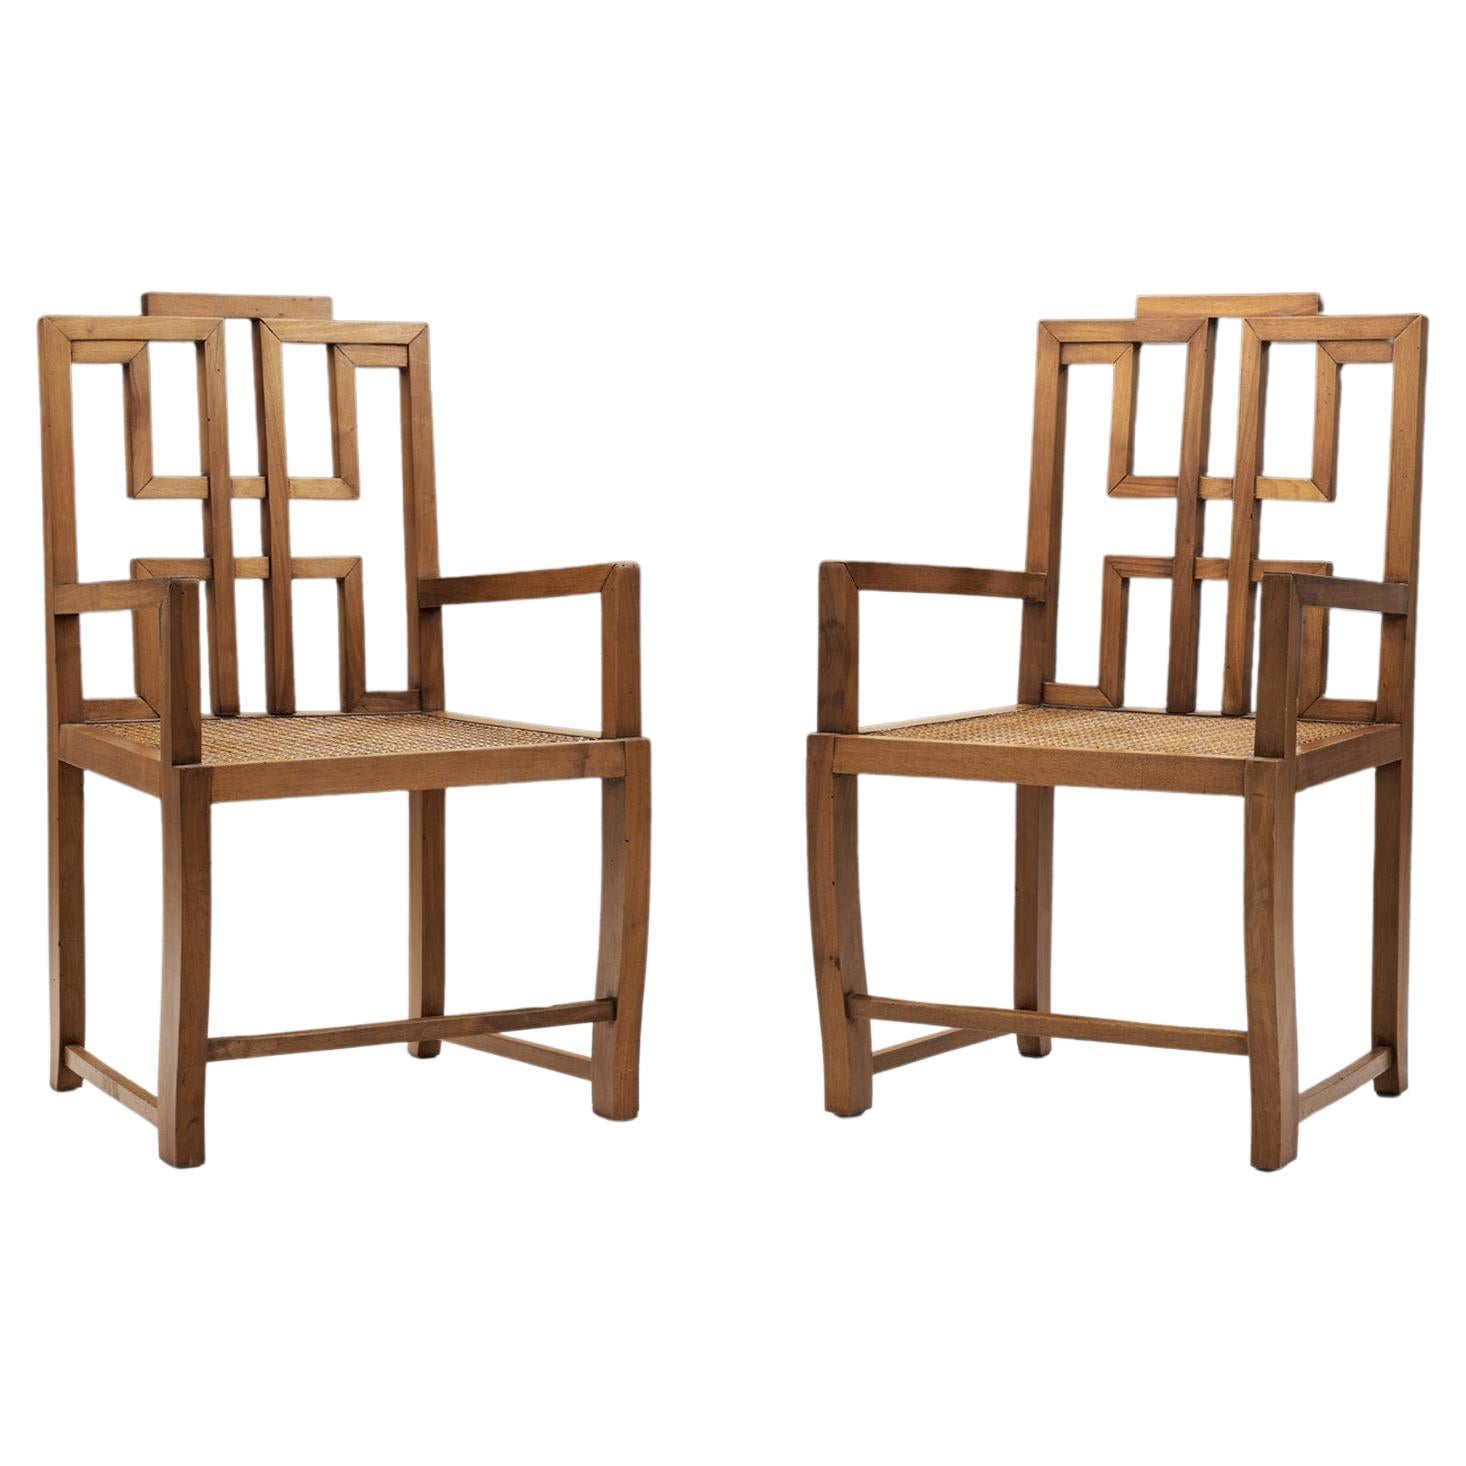 Late 20th Century Anglo-Chinese Chairs with Caned Seats, Europe 1980s